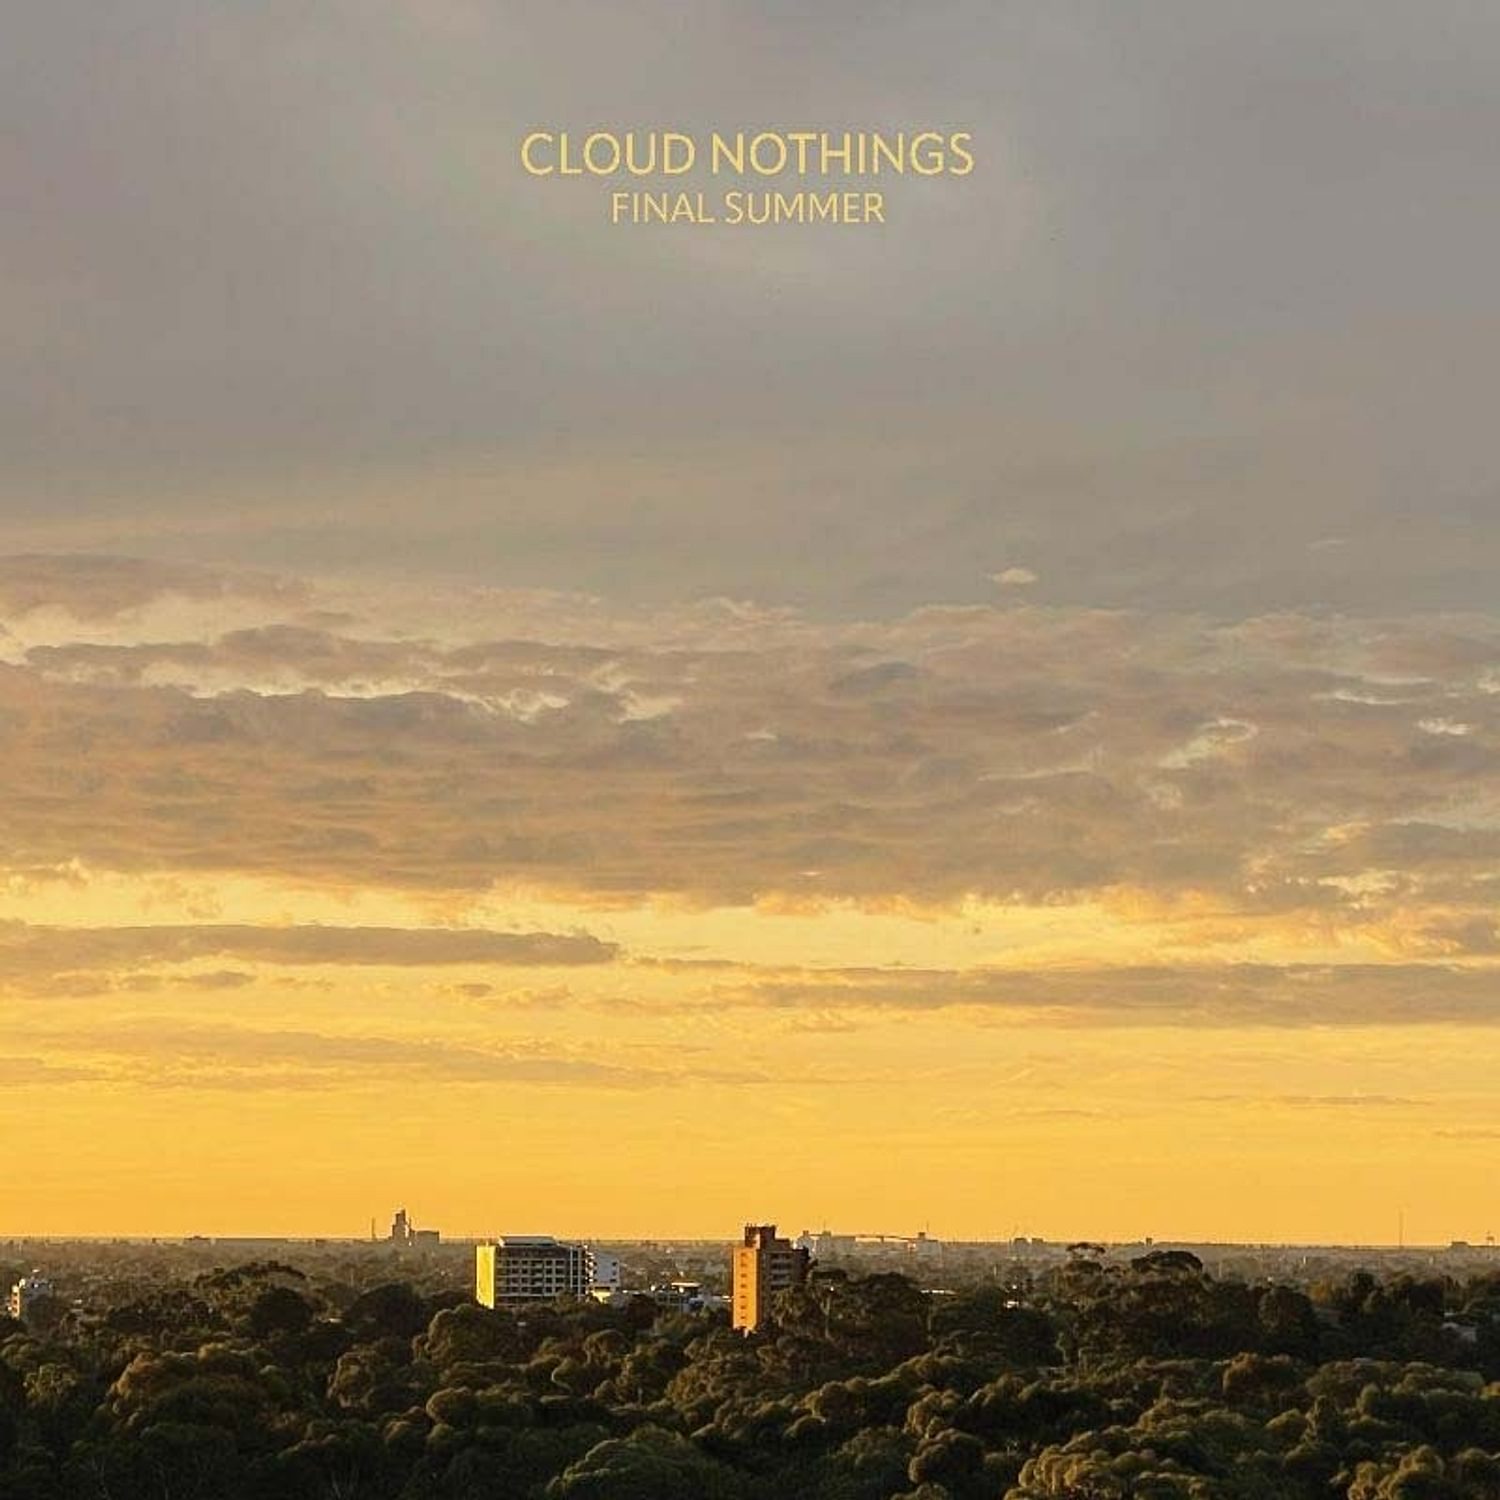 <p><strong>Cloud Nothings</strong> - Final Summer</p>